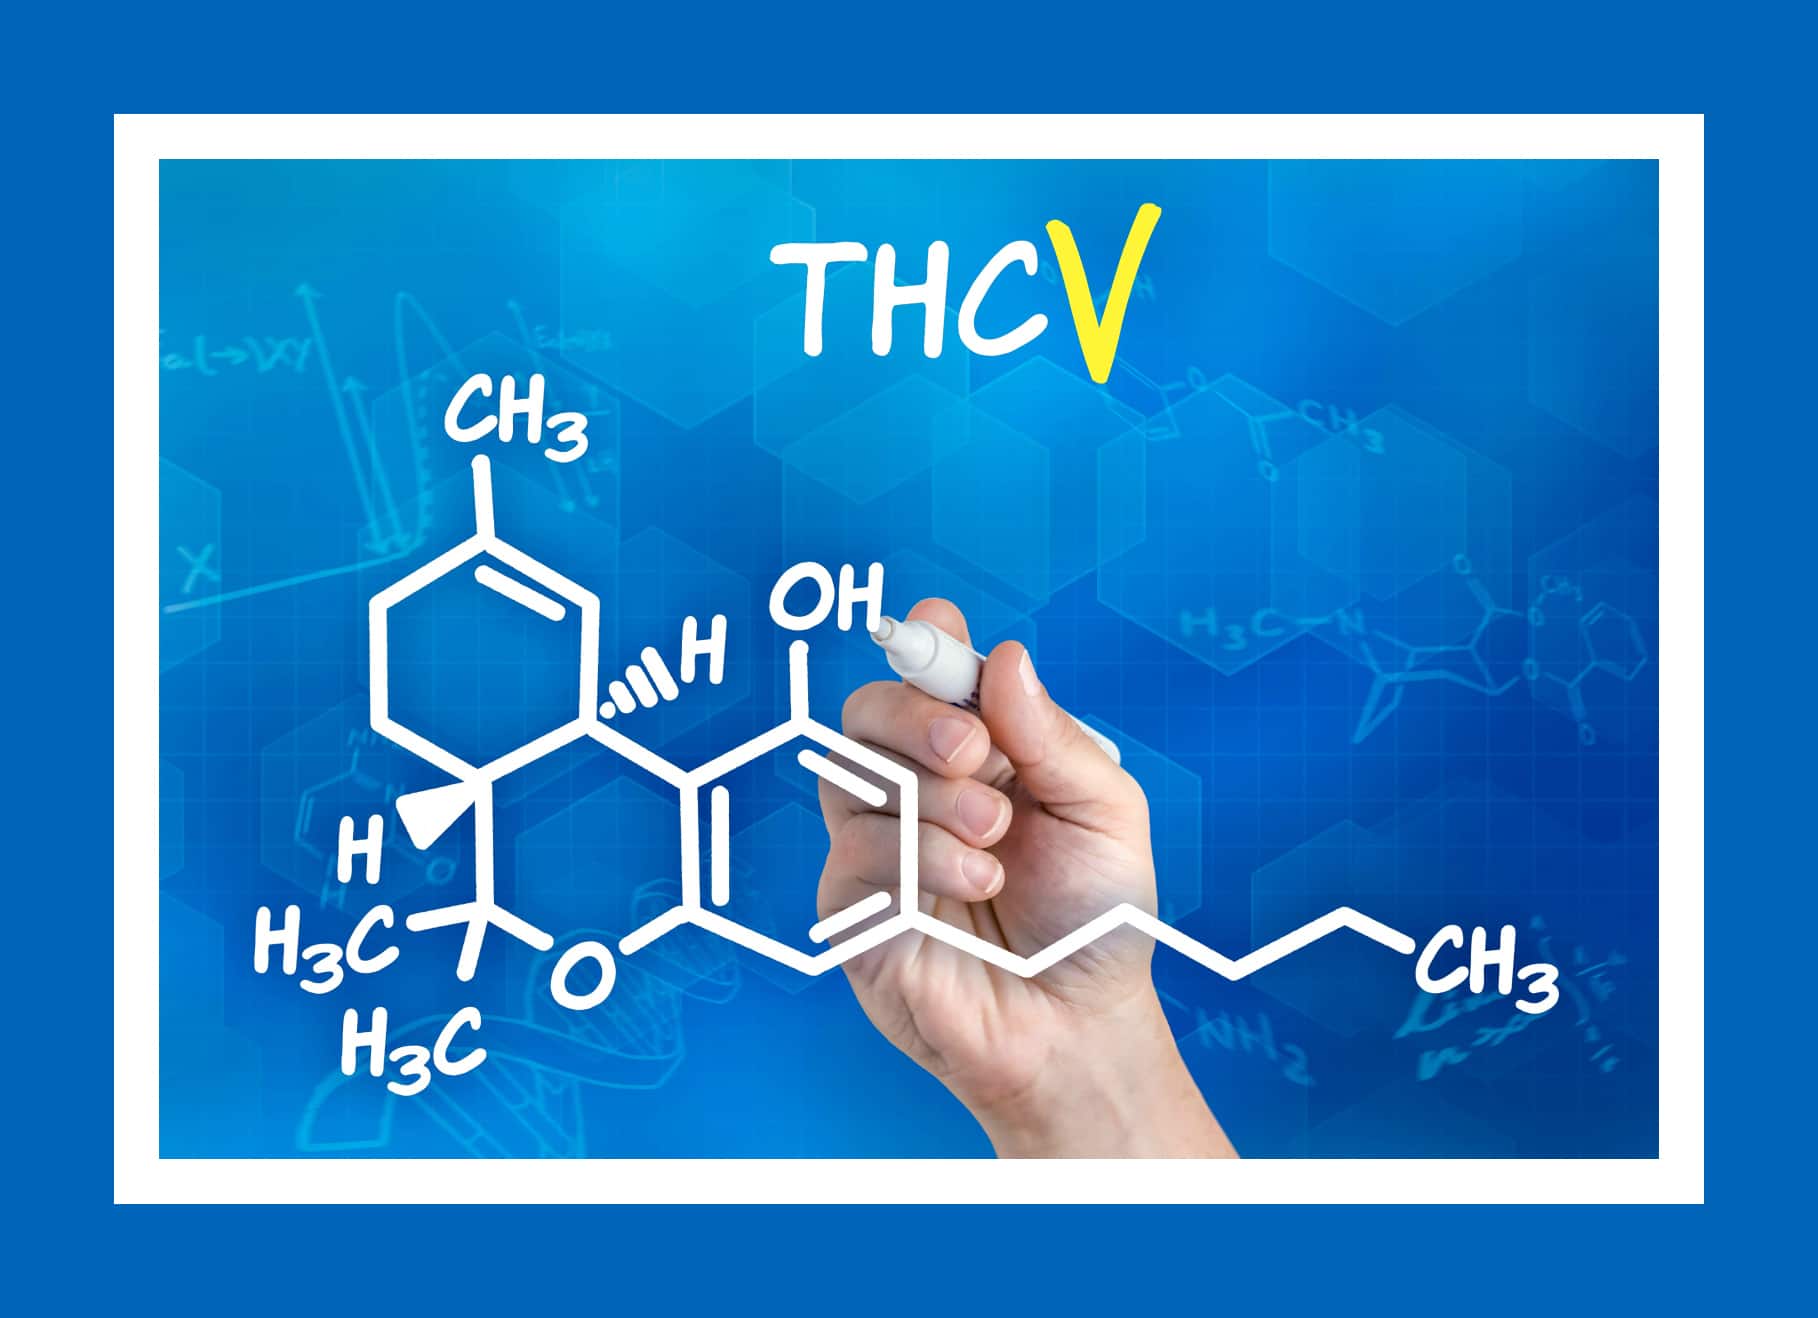 WHAT IS THCV? - Thcv|Thc|Effects|Cannabinoid|Cannabinoids|Cannabis|Strains|Cbd|Products|Research|Benefits|Receptors|Doses|Studies|Hemp|Marijuana|Cb1|Body|Tetrahydrocannabivarin|Plant|Study|People|System|Drug|Receptor|Plants|Users|Properties|Diabetes|Disease|Side|Product|Compound|Appetite|Effect|Levels|Cb2|Brain|Cbg|States|Psychoactive Effects|Cb2 Receptors|Weight Loss|Thcv Products|Low Doses|Cb1 Receptors|Endocannabinoid System|United States|High Doses|Potential Benefits|Cannabis Plants|Cb1 Receptor|Cannabinoid Receptors|Molecular Structure|Psychoactive Properties|Large Doses|Nervous System|Cannabis Plant|Cannabis Strains|Thcv Effects|Durban Poison|Farm Bill|Drug Test|View Abstract|Animal Studies|Immune System|Hemp Plants|Small Doses|High Thcv Strains|Marijuana Strains